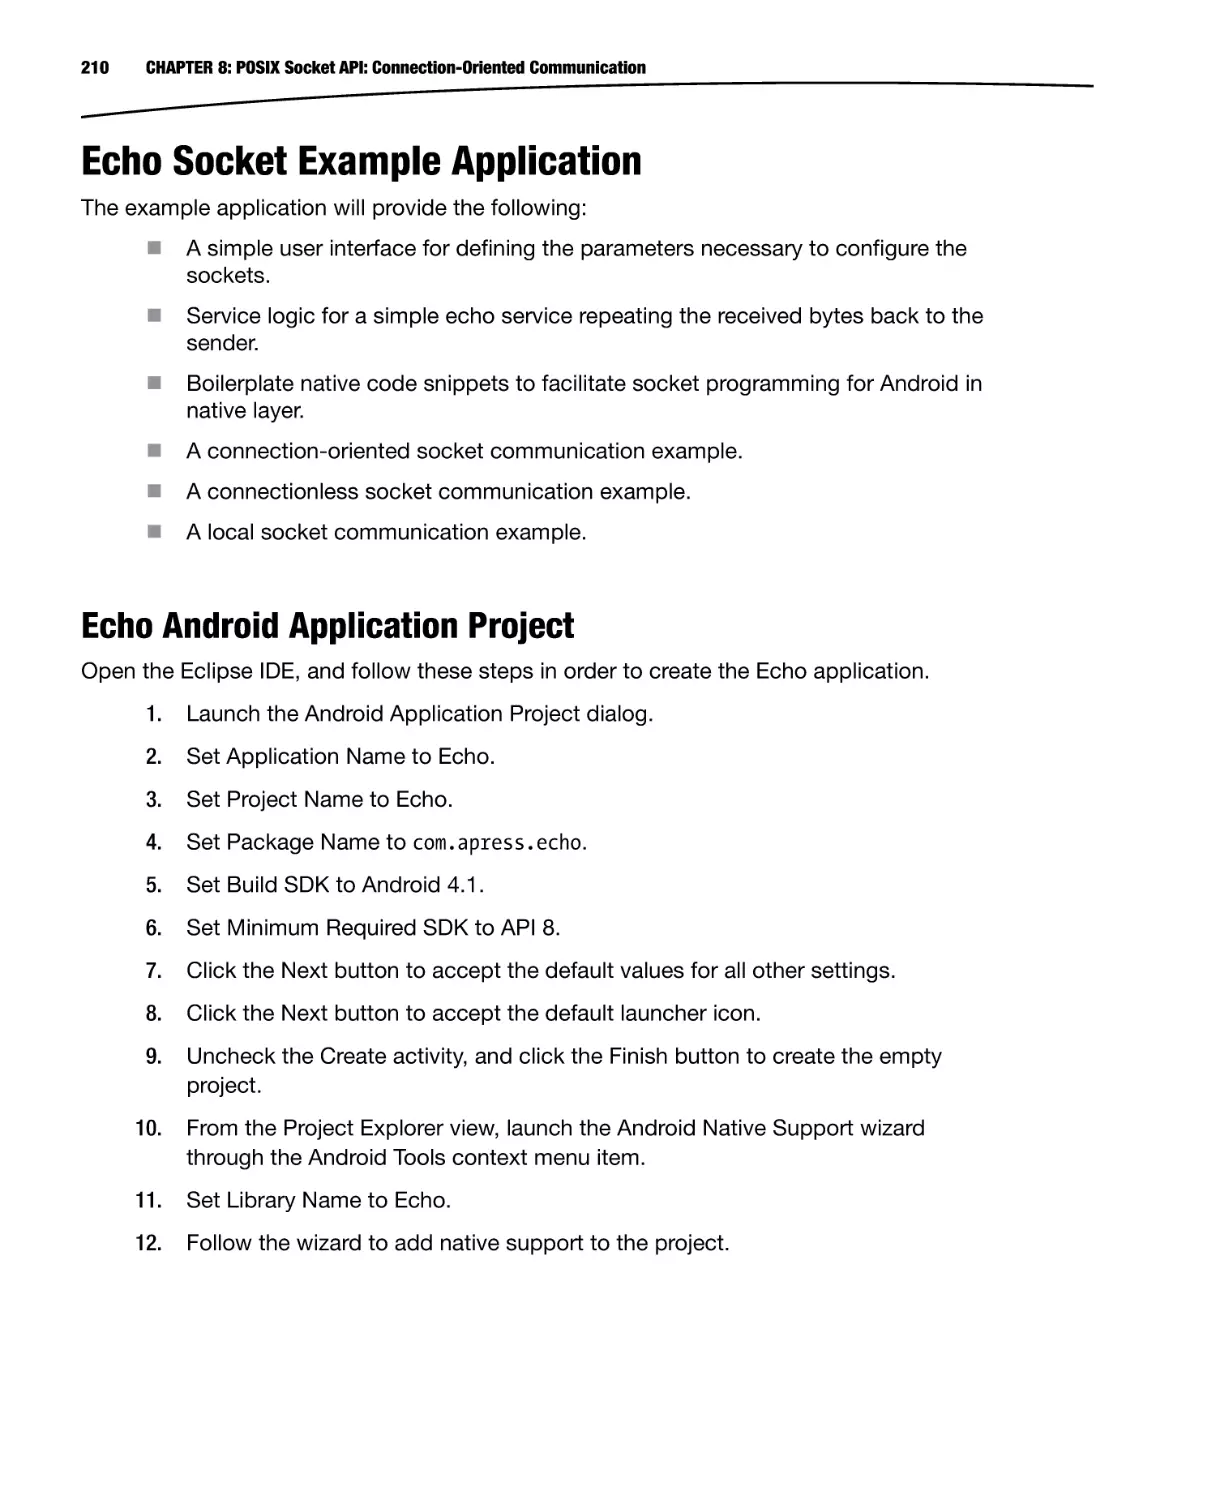 Echo Socket Example Application
Echo Android Application Project